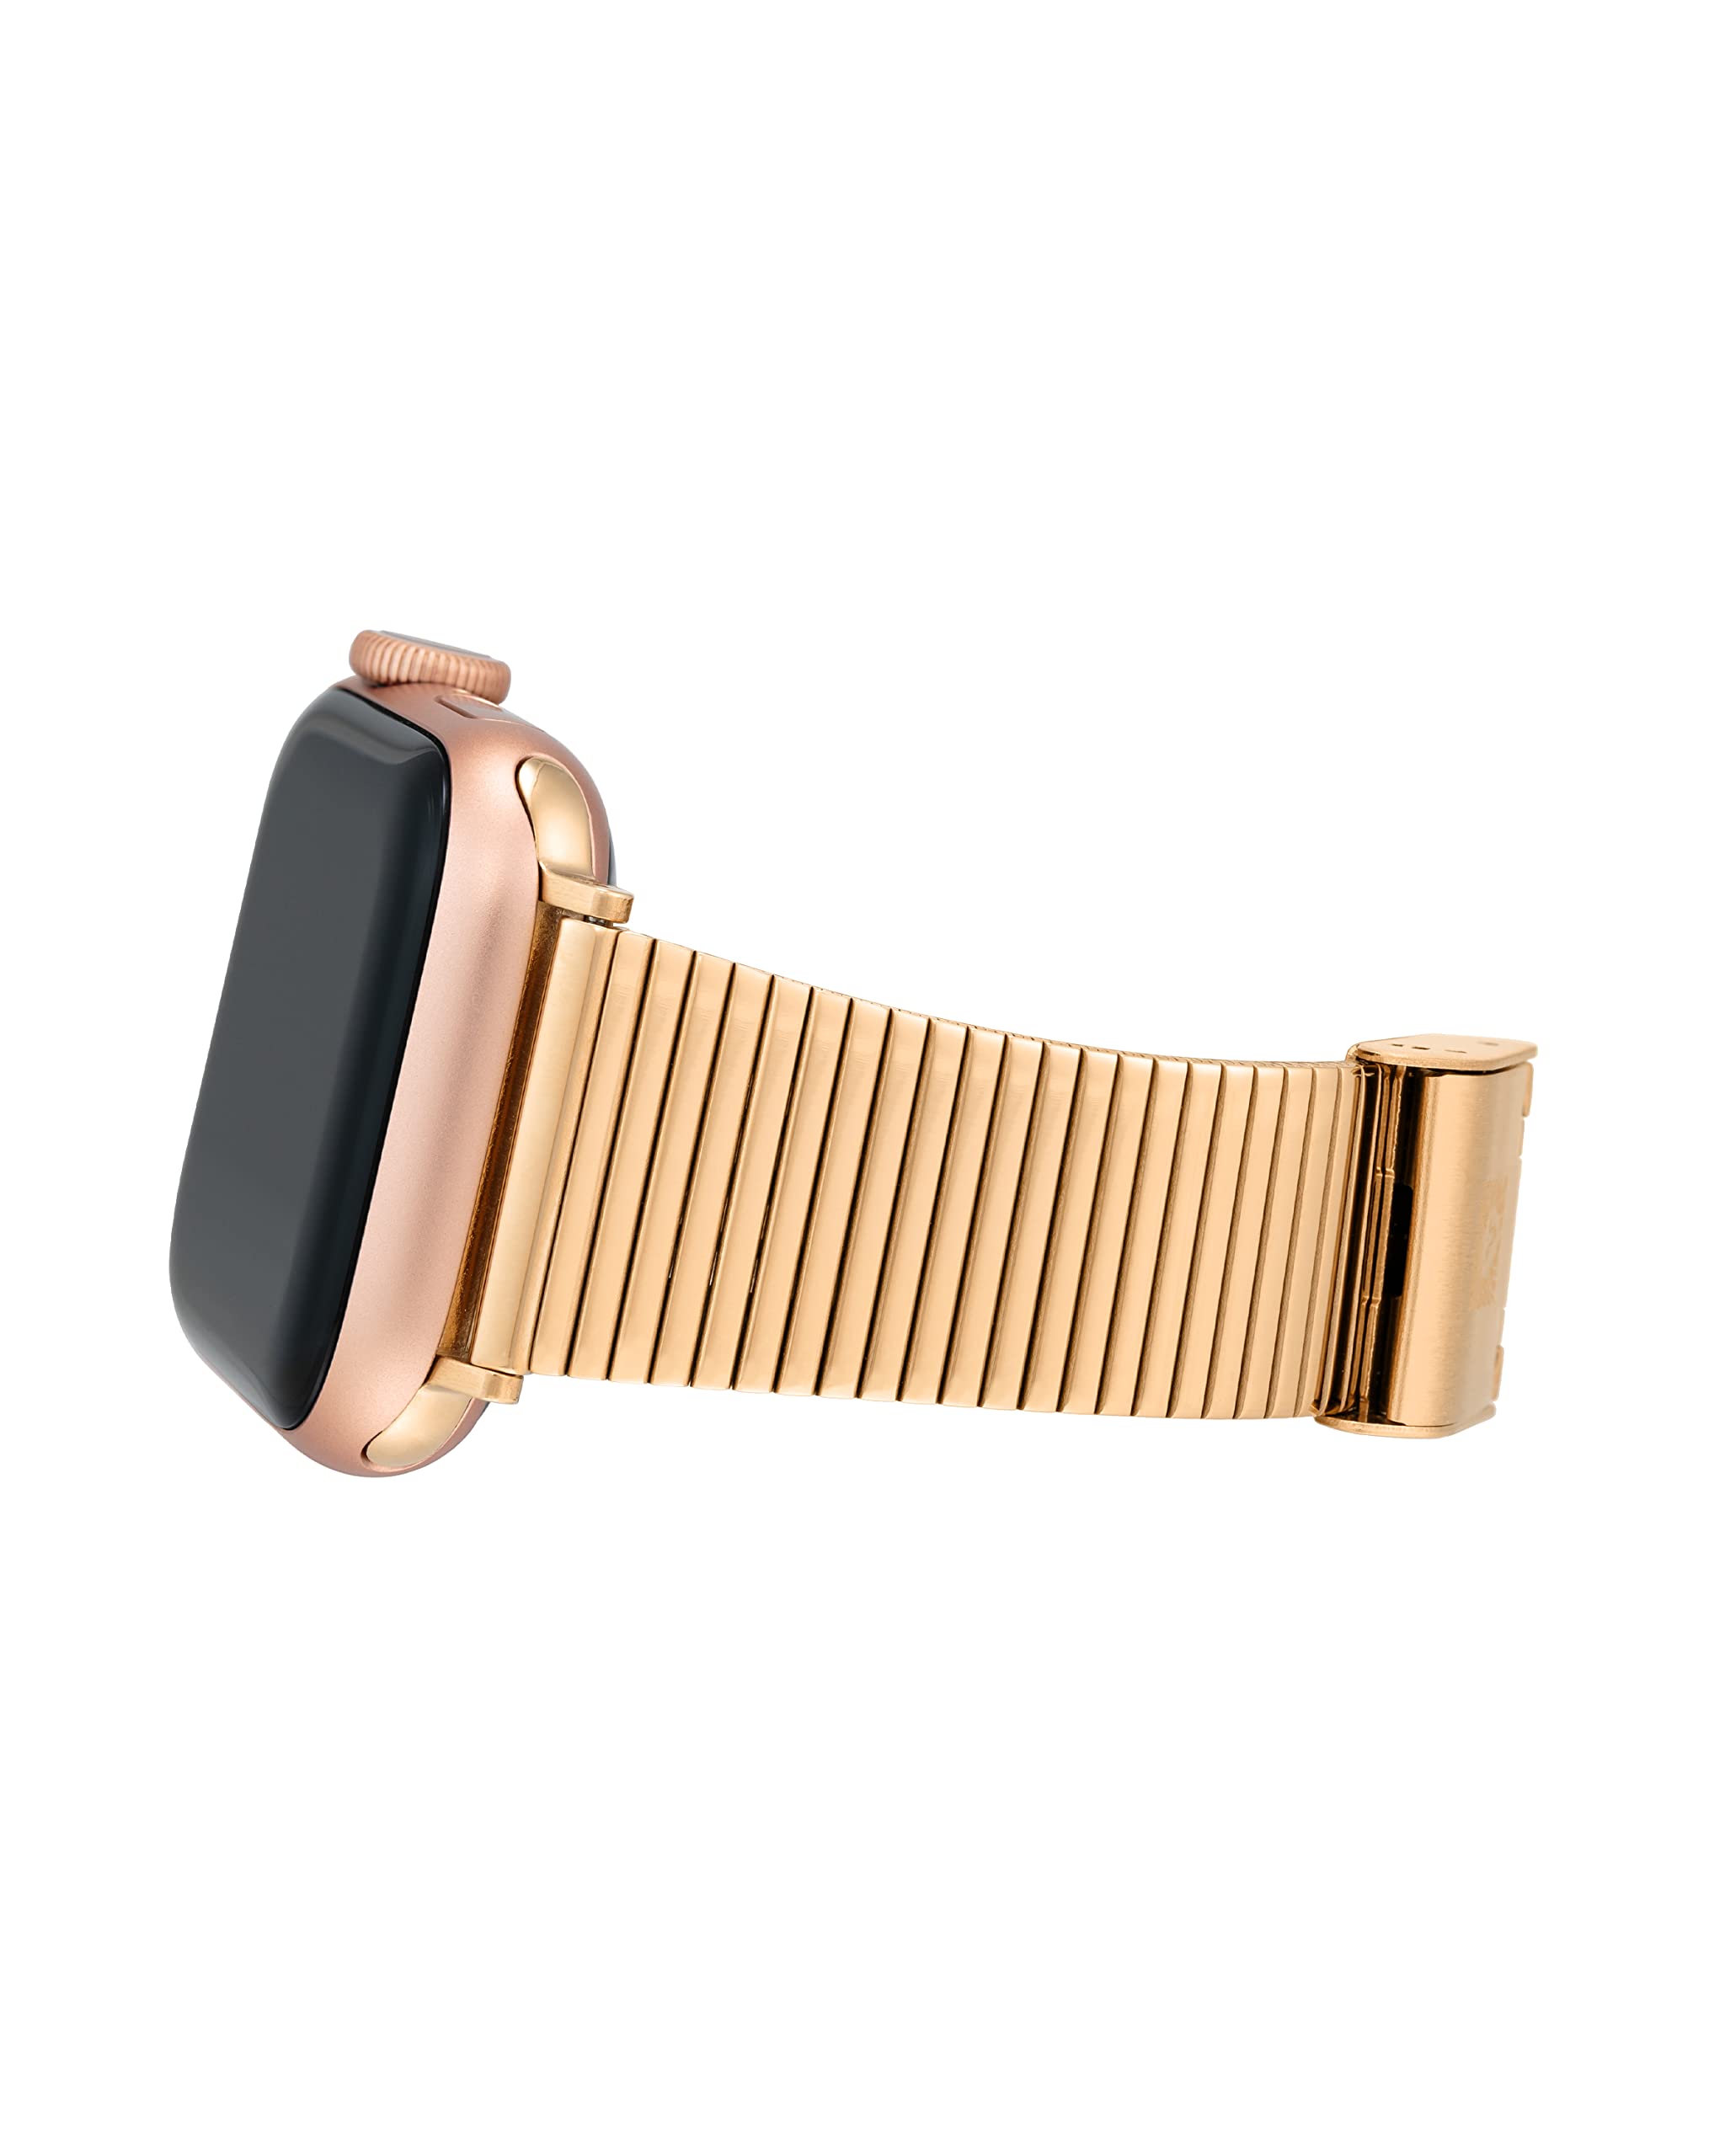 Anne Klein Stainless Steel Fashion Band for Apple Watch, Secure, Adjustable, Apple Watch Replacement Band, Fits Most Wrists